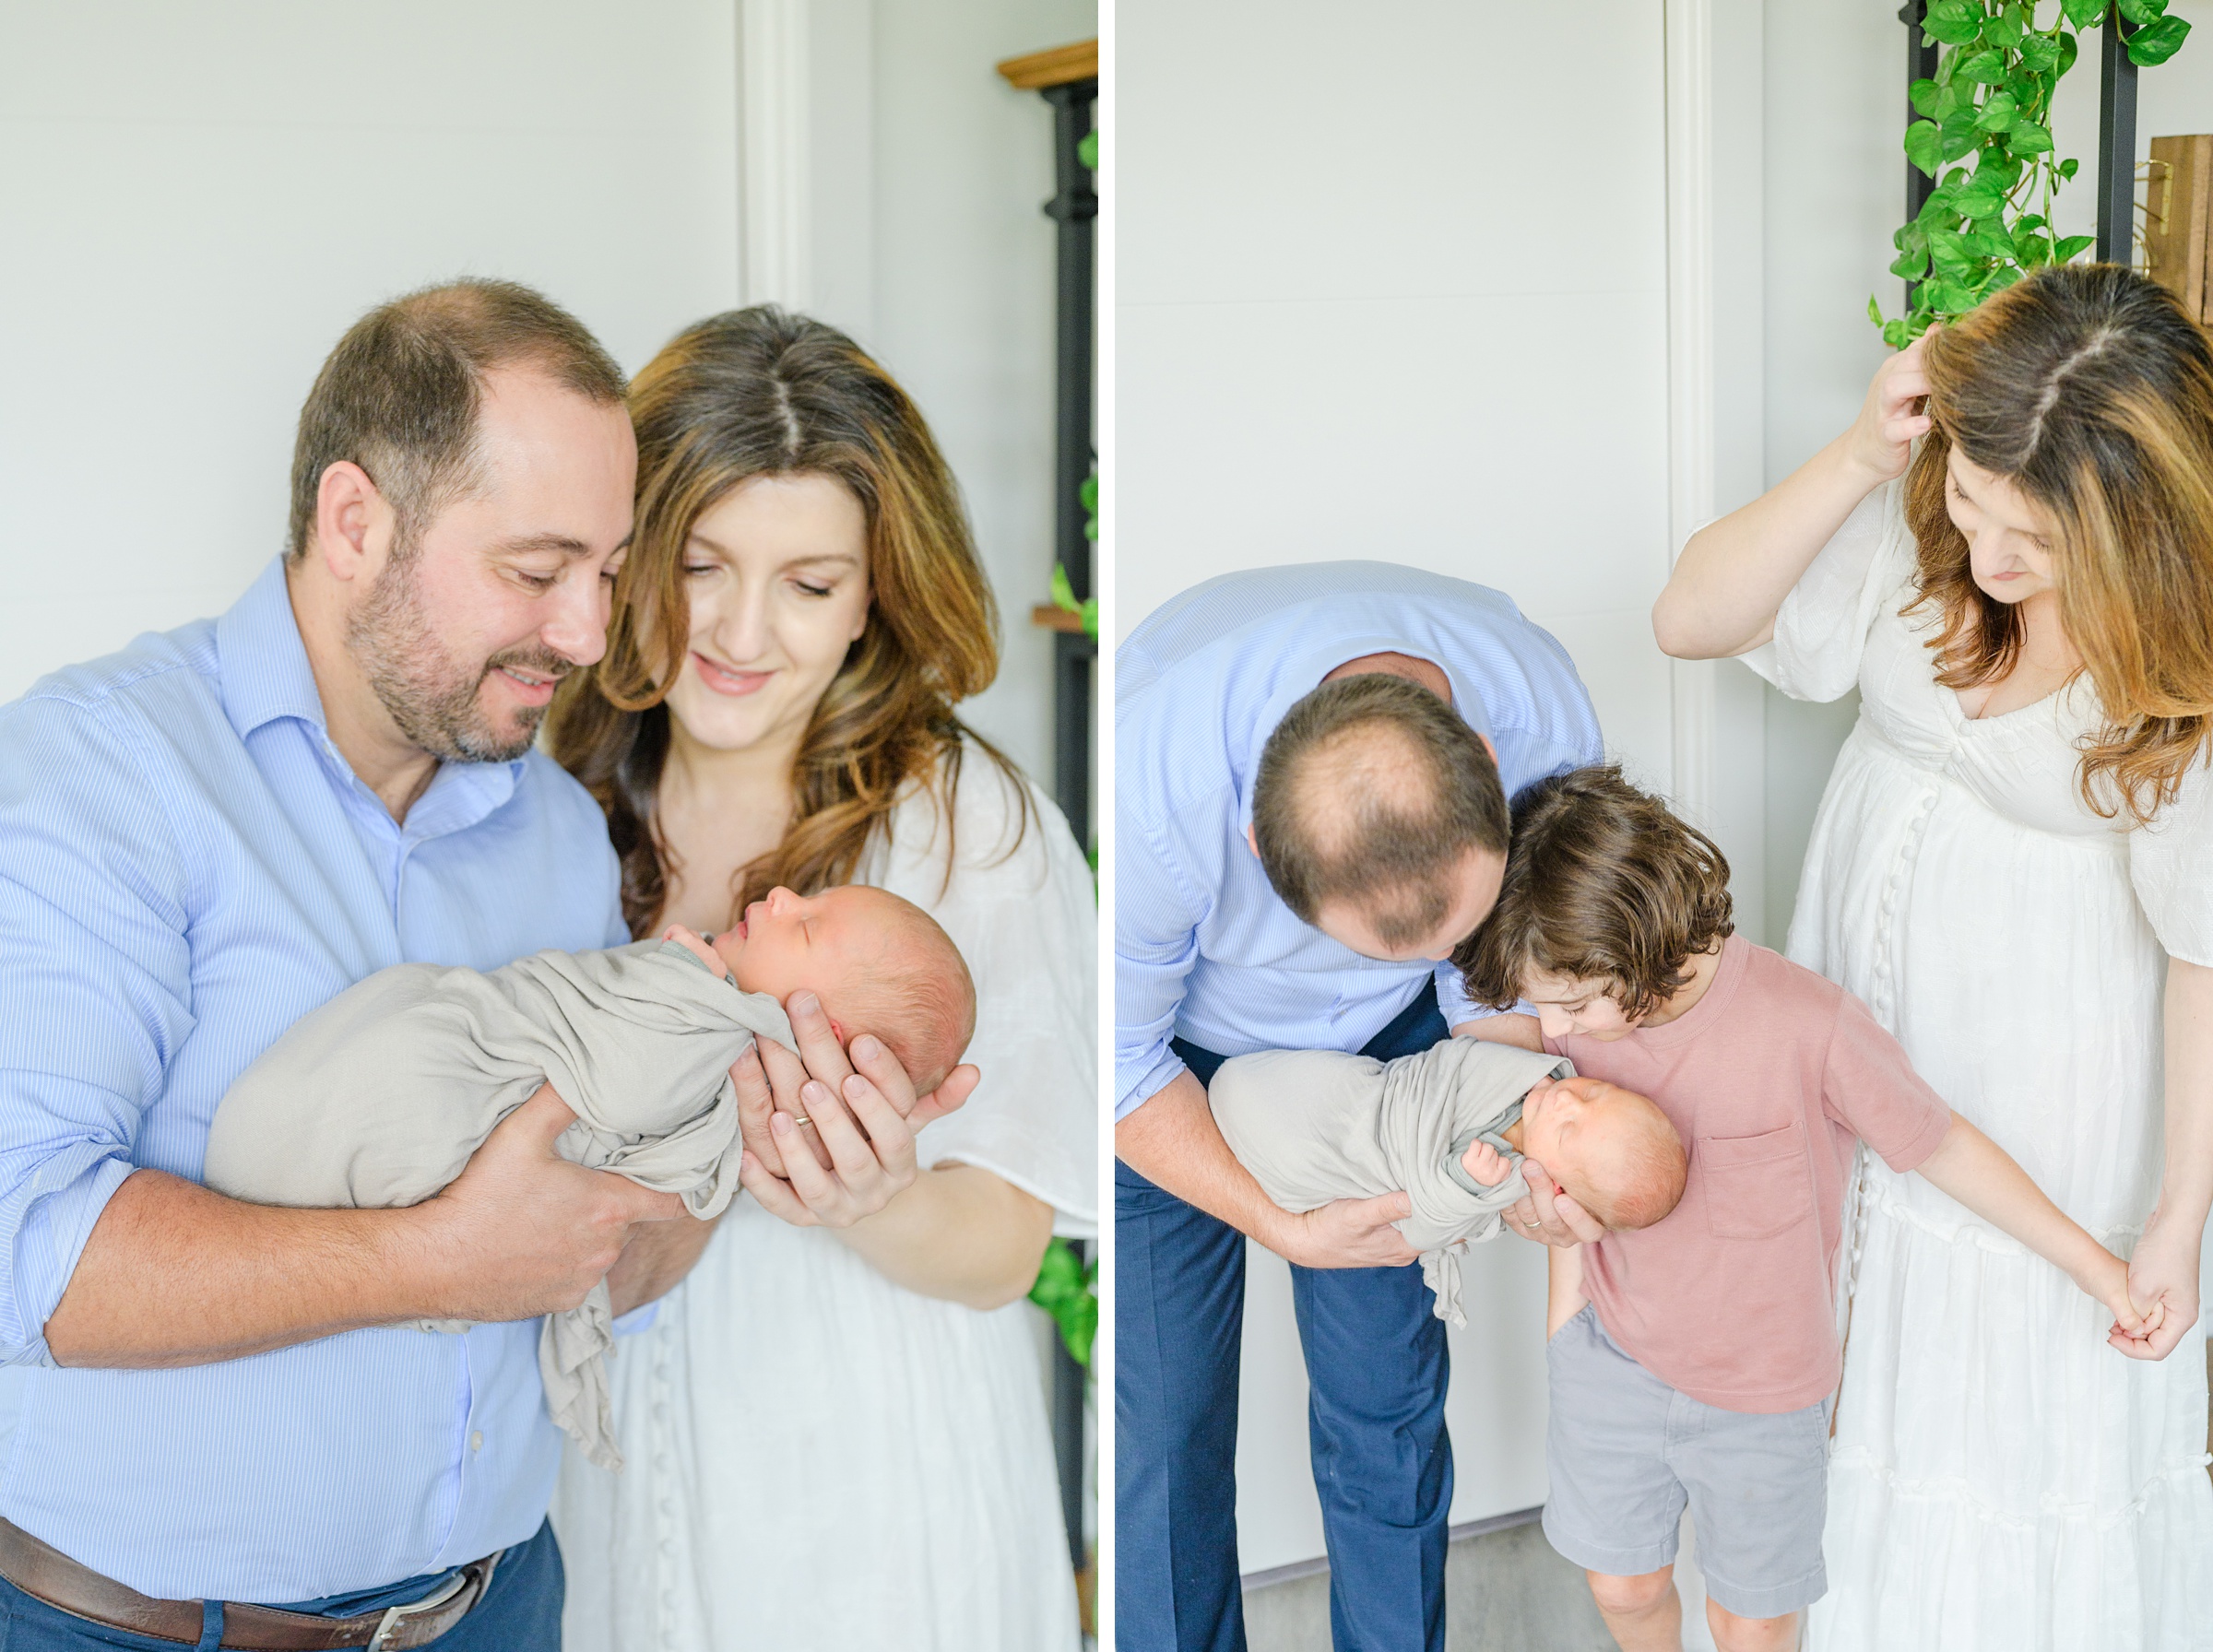 In-home newborn and family portrait session in Washington, D.C. photographed by Lifestyle Newborn Photographer Cait Kramer Photography.